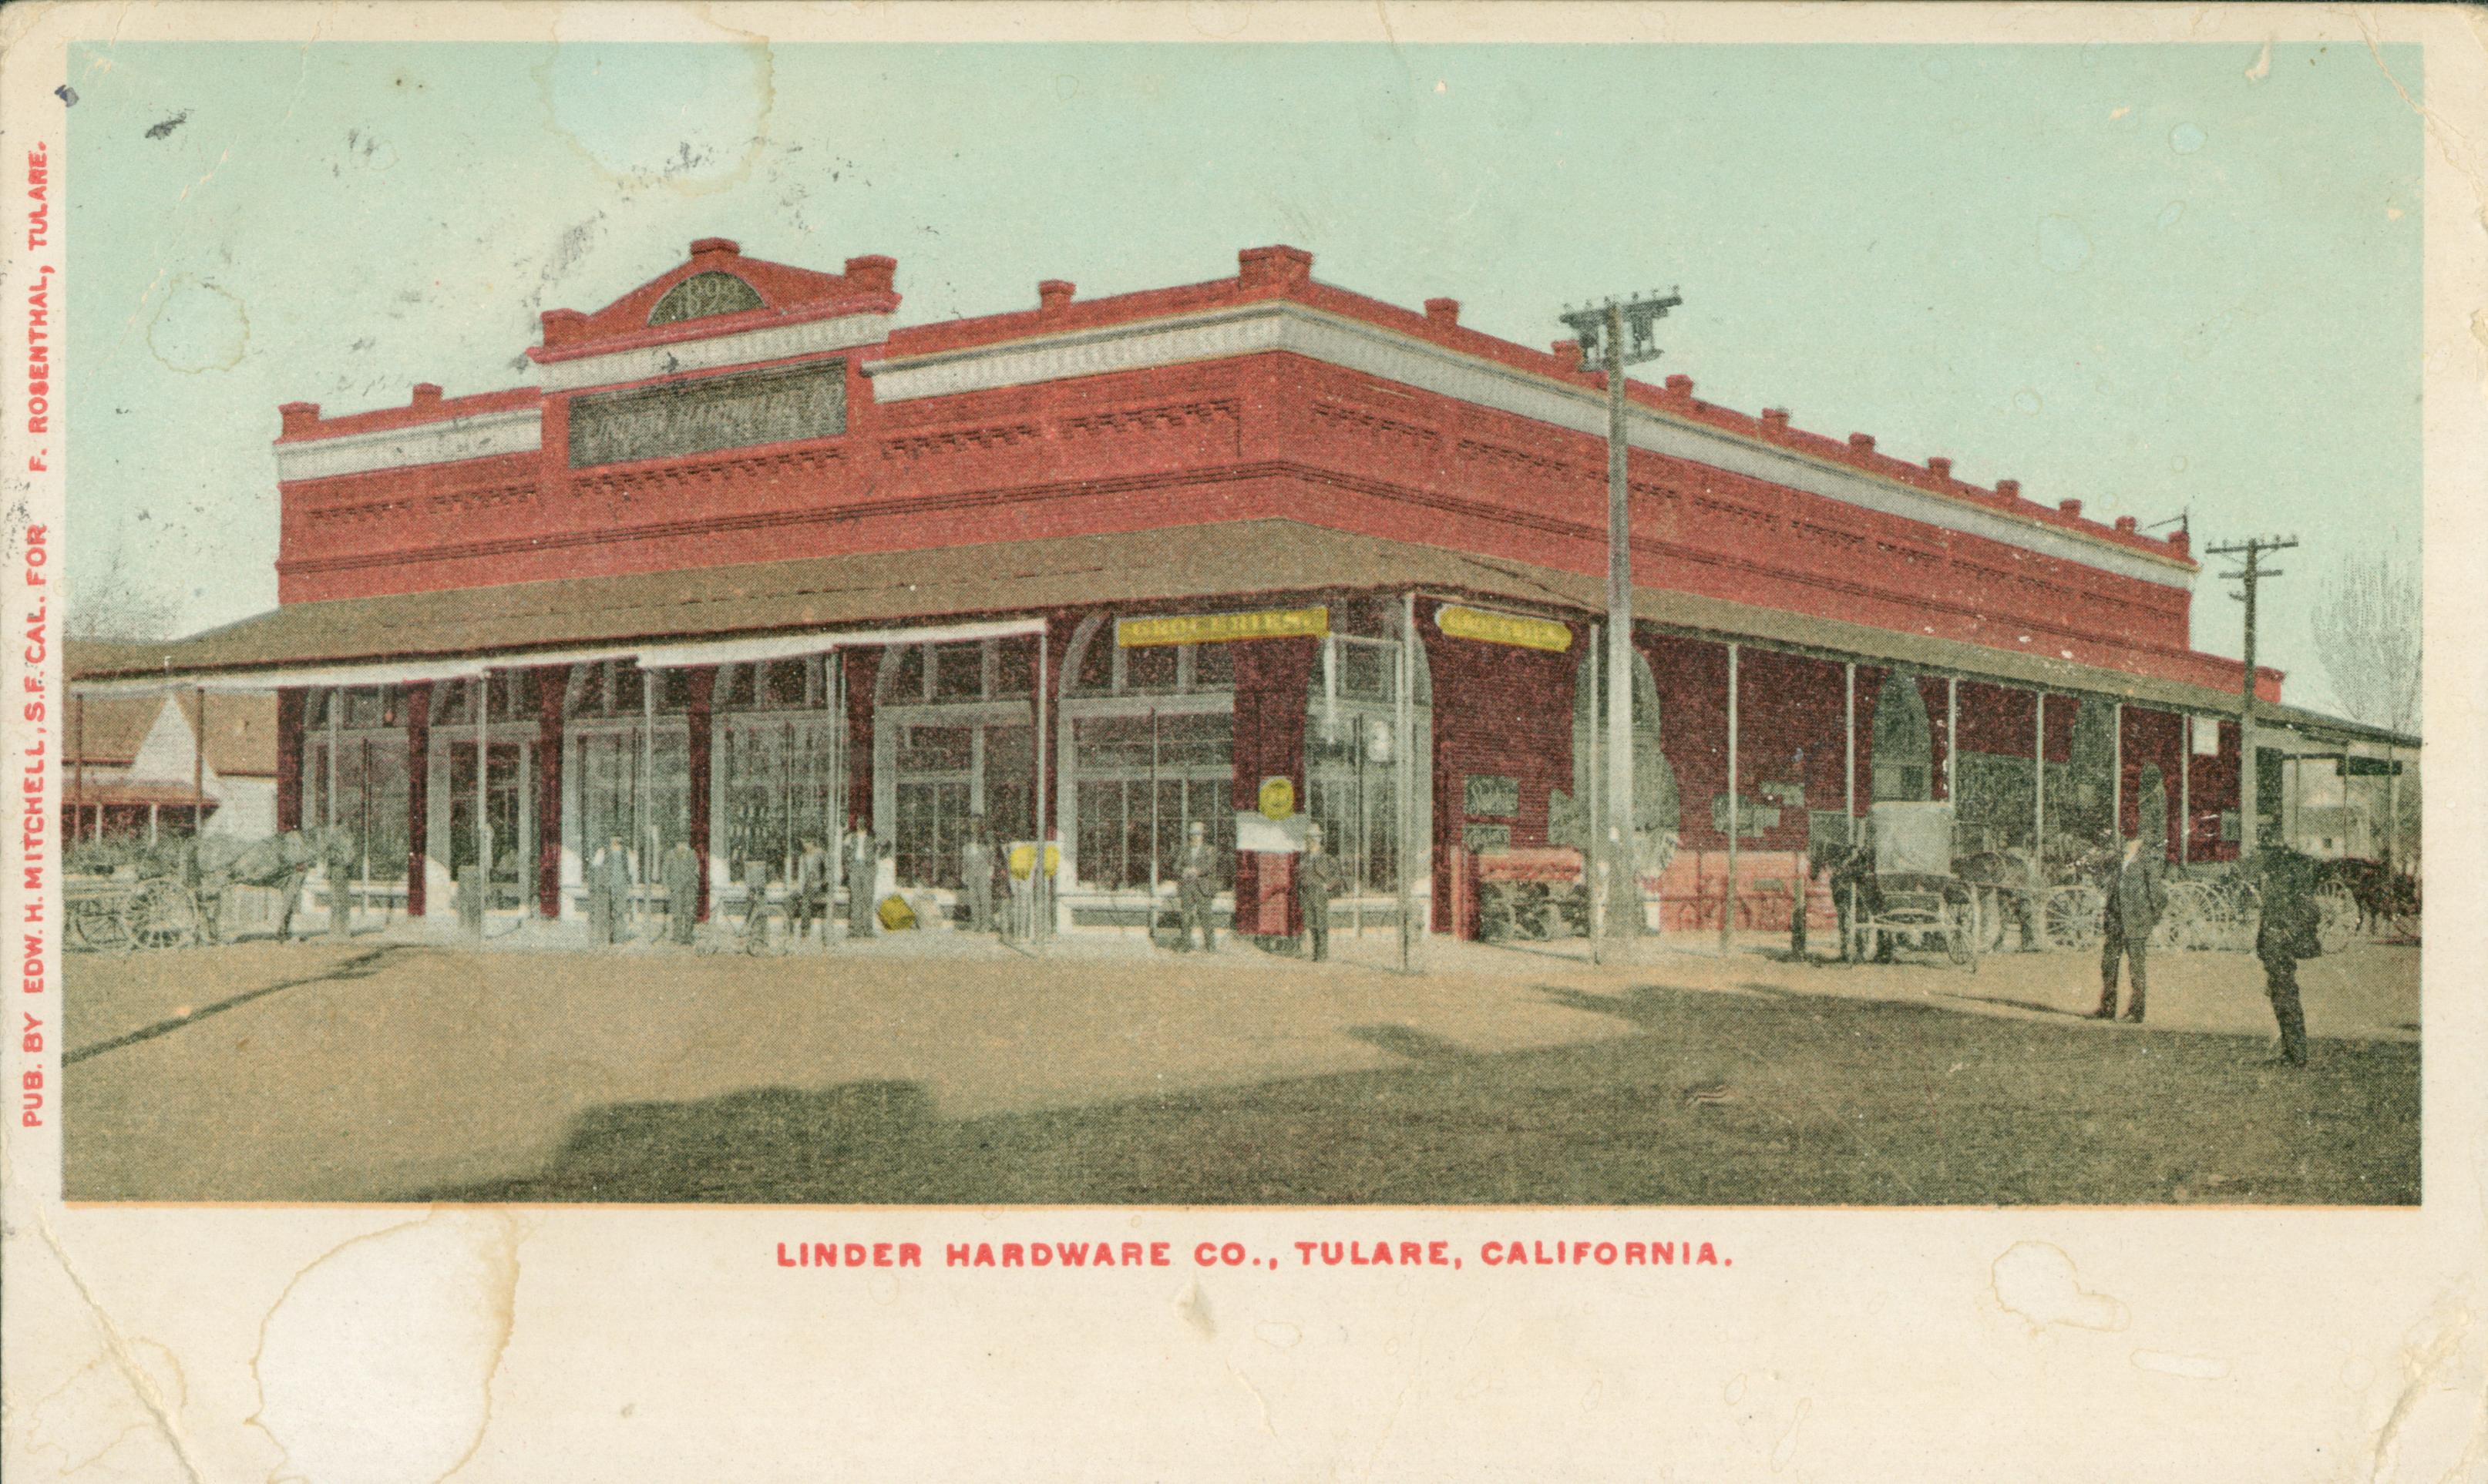 Shows a corner view of the Linder Hardware company in Tulare